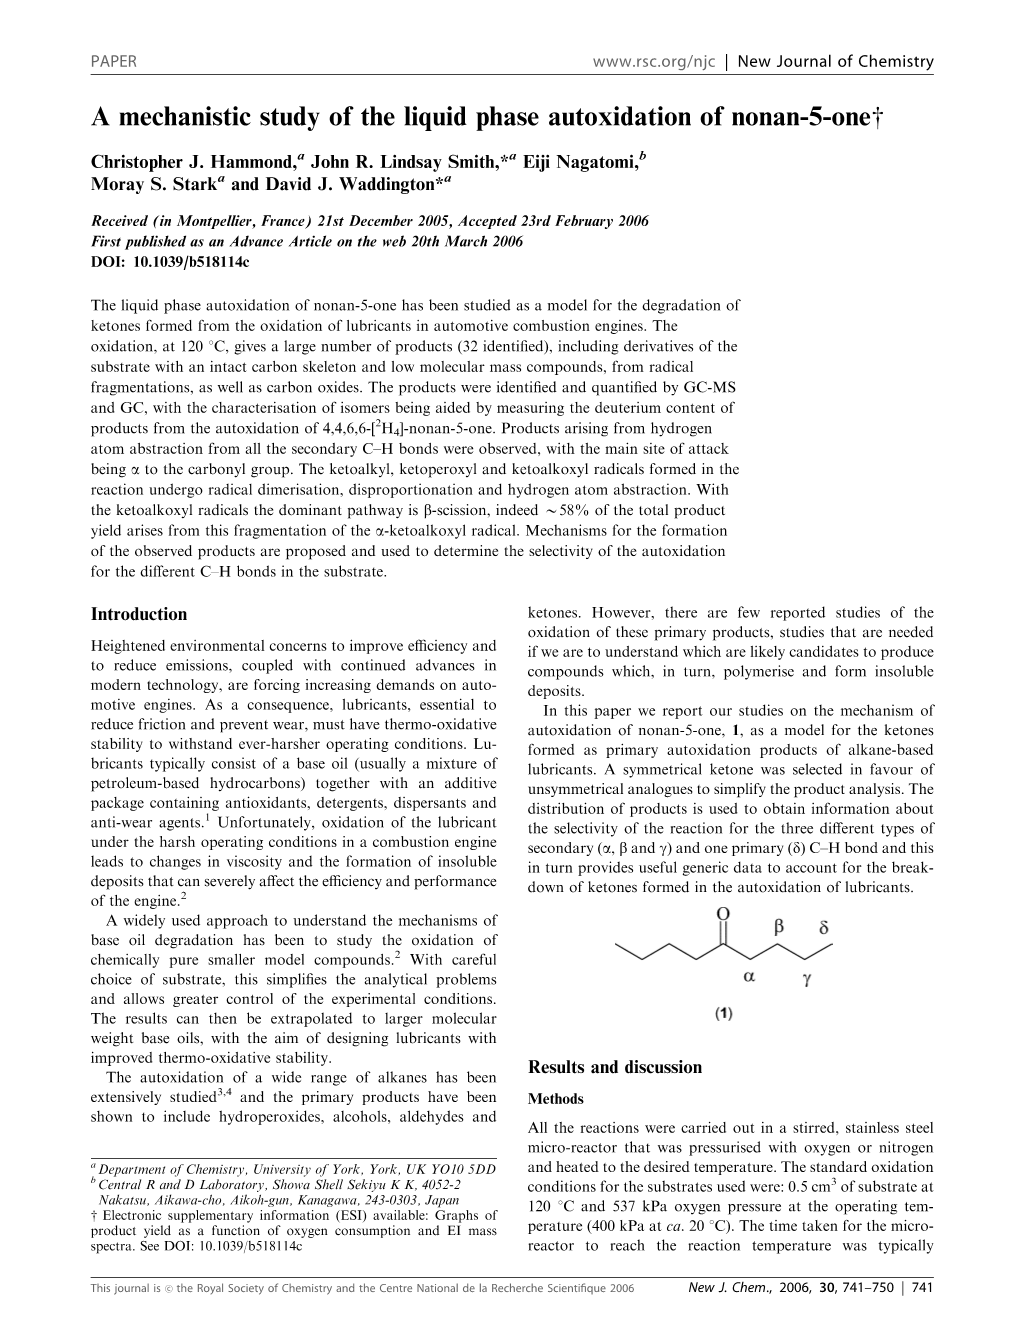 A Mechanistic Study of the Liquid Phase Autoxidation of Nonan-5-Onew